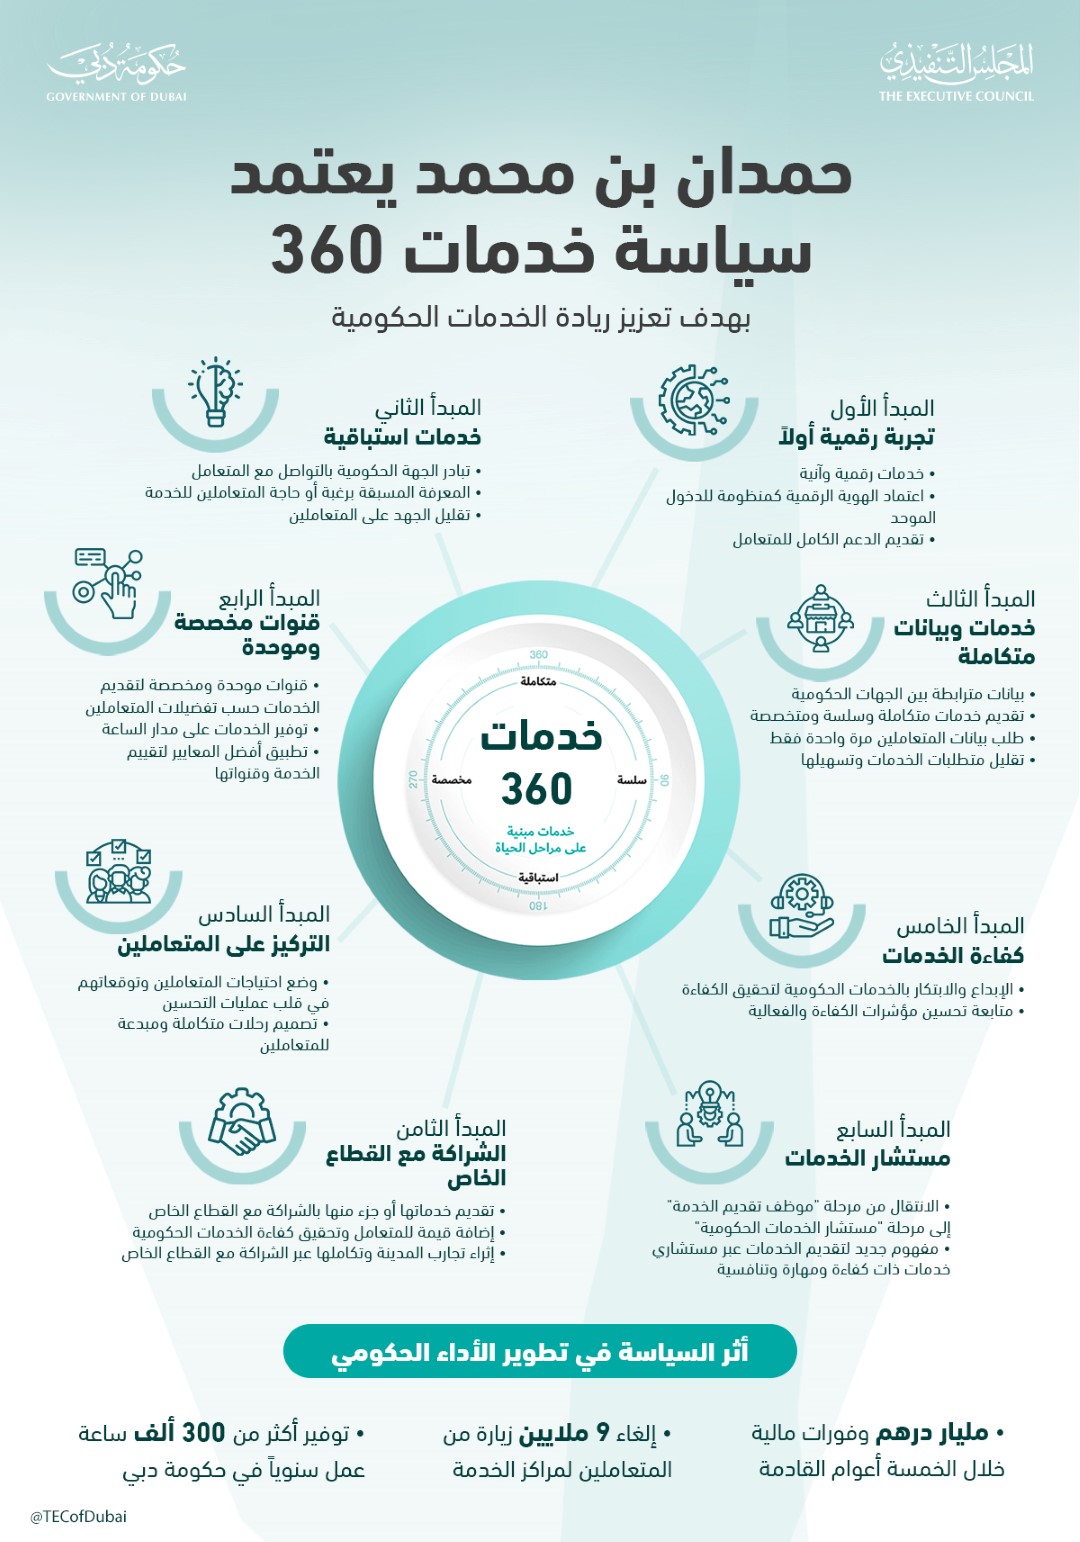 The Executive Council of Dubai approves ‘Services 360’ to improve and develop government services